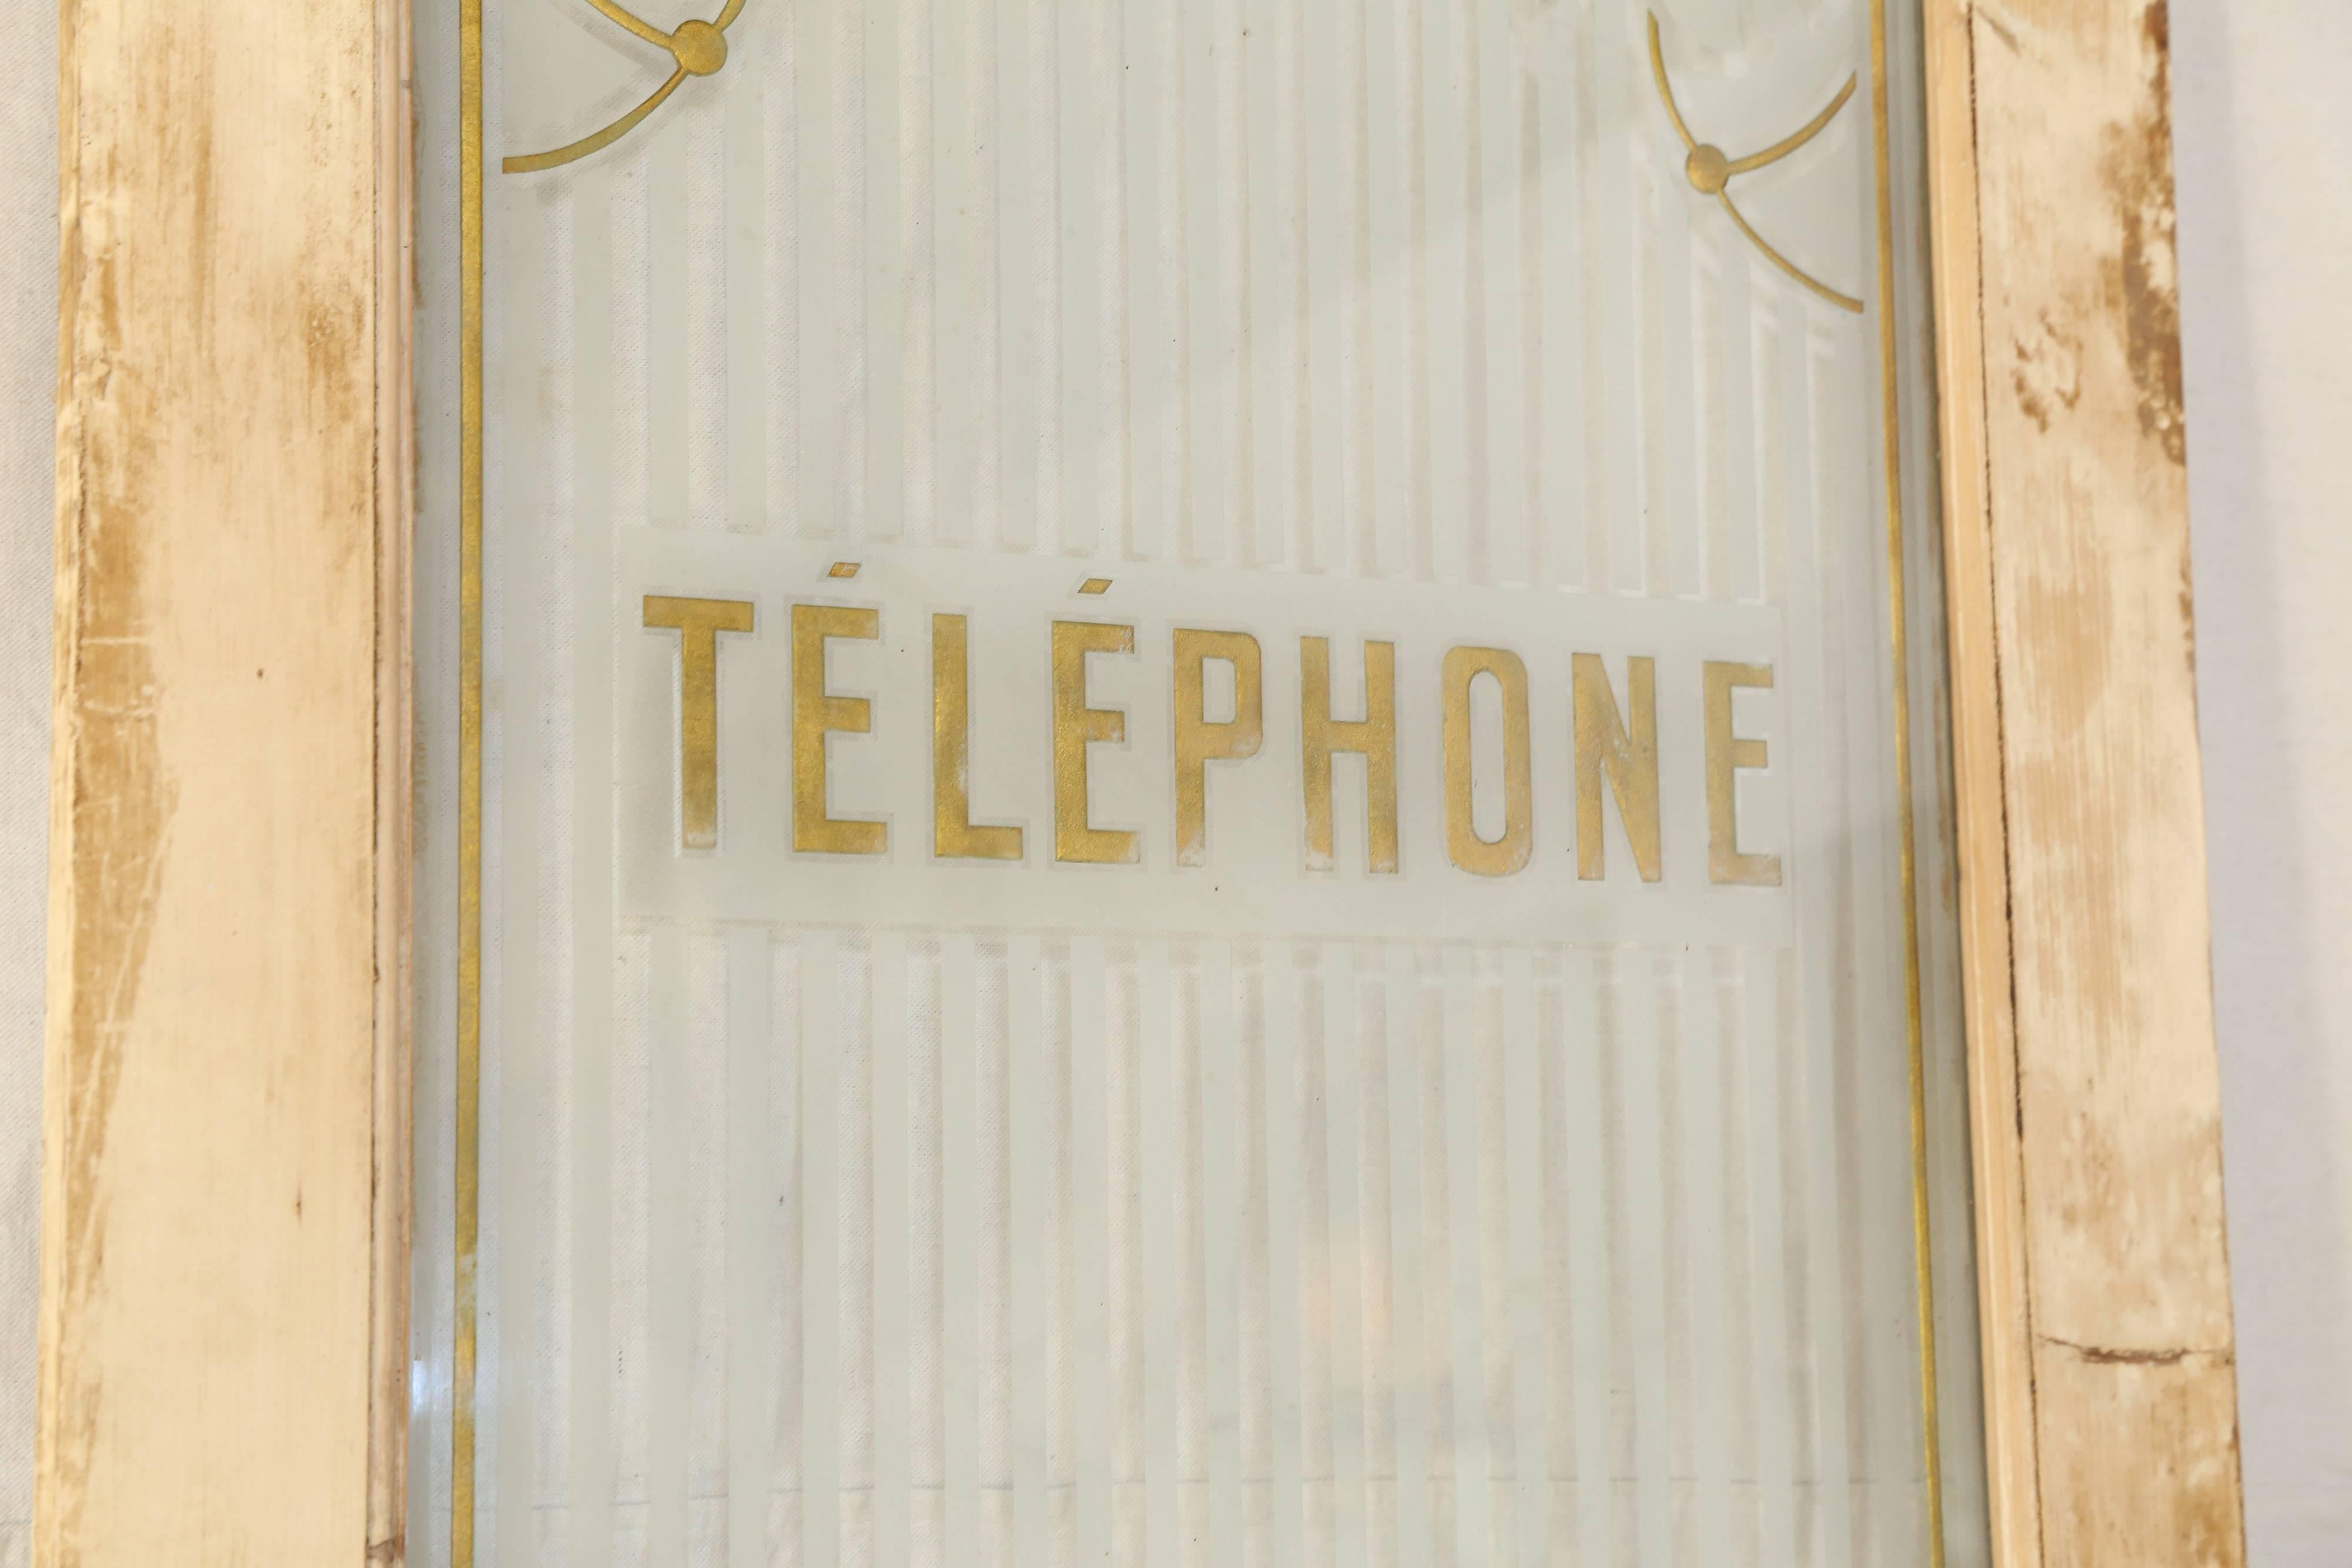 Etched, carved and gold leafed glass in the Art Nouveau style inscribed with the word 'Telephone' set in a hardwood door. The door is constructed using visible square cut nails and is sturdy in every regard with no cracks or splits. The door retains